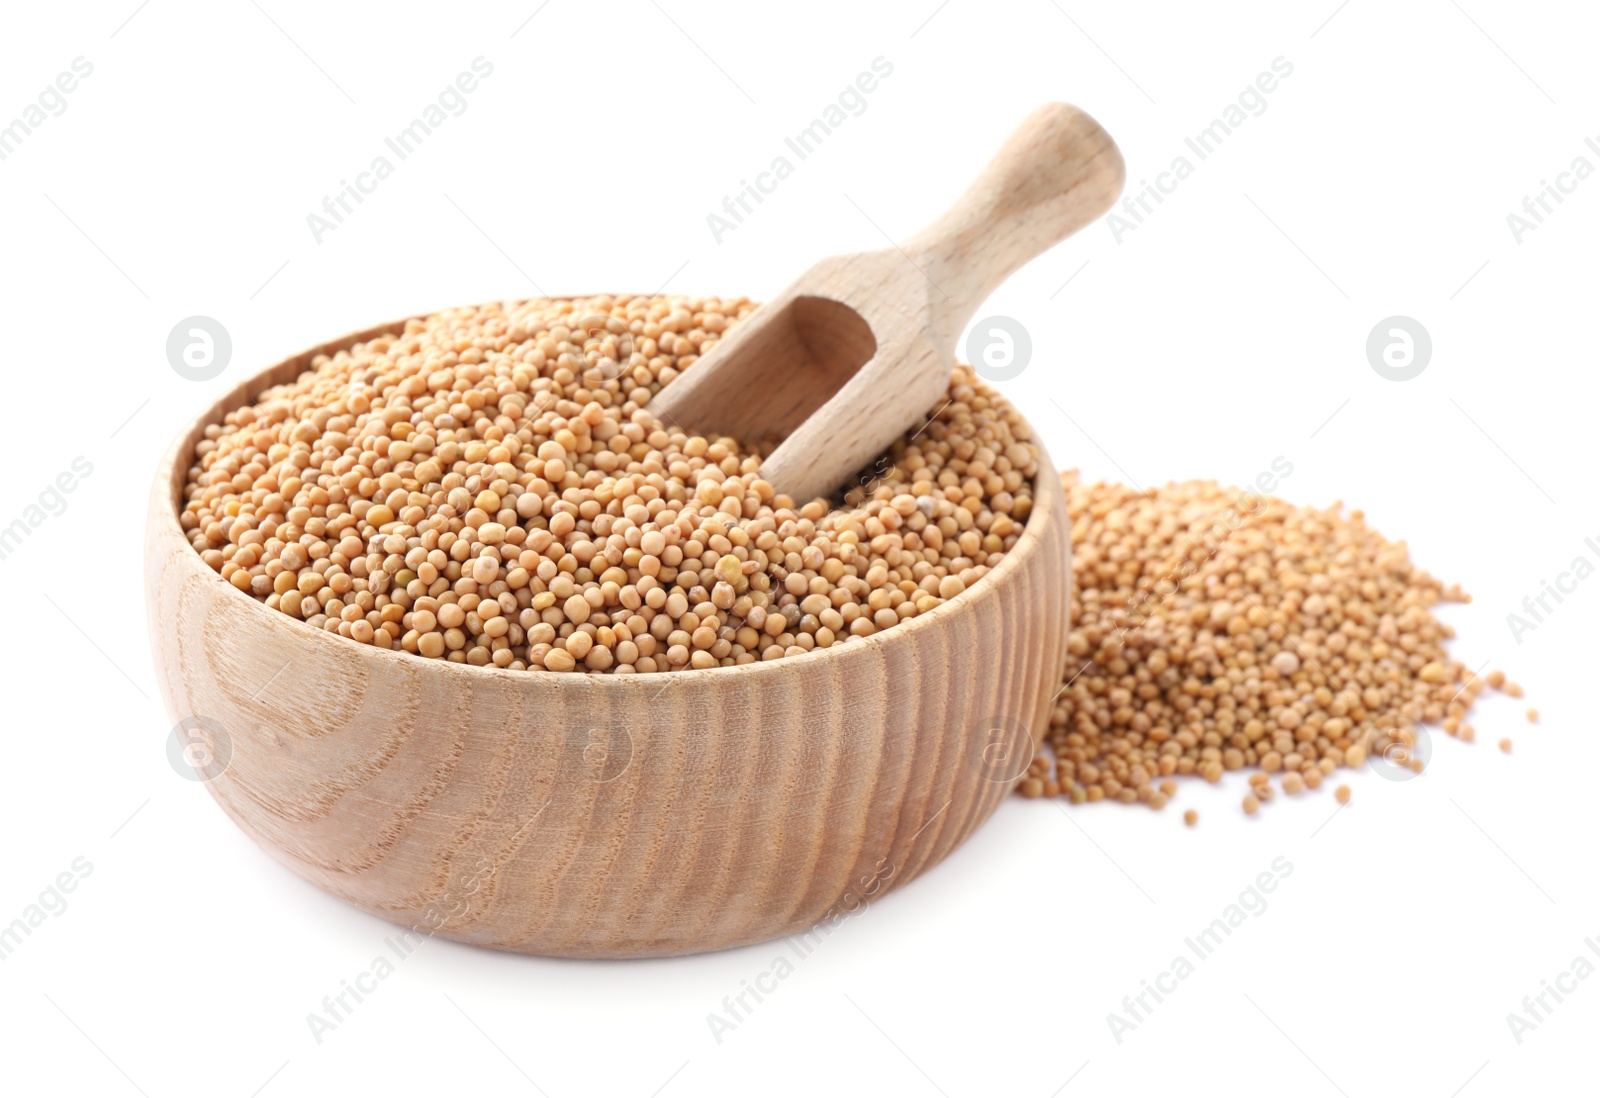 Photo of Mustard seeds with wooden bowl and scoop isolated on white